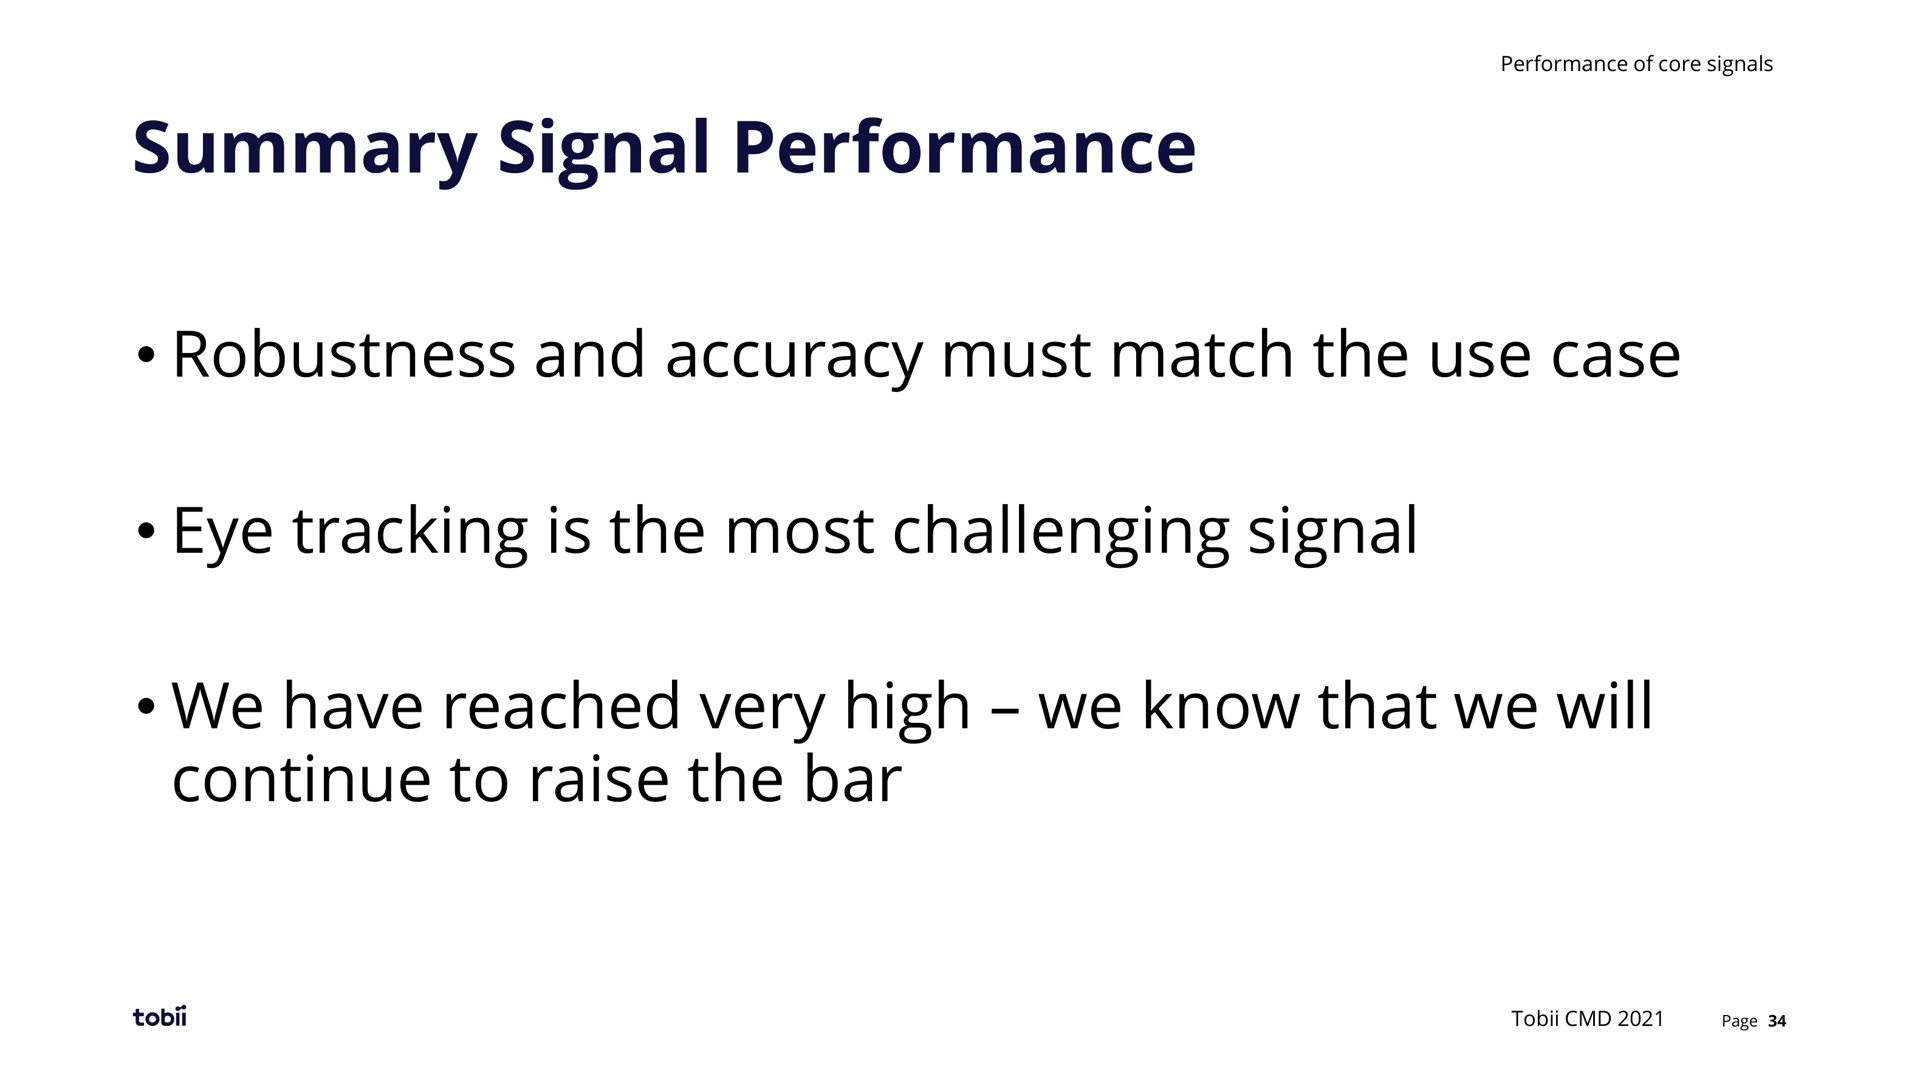 summary signal performance robustness and accuracy must match the use case eye tracking is the most challenging signal we have reached very high we know that we will continue to raise the bar | Tobii